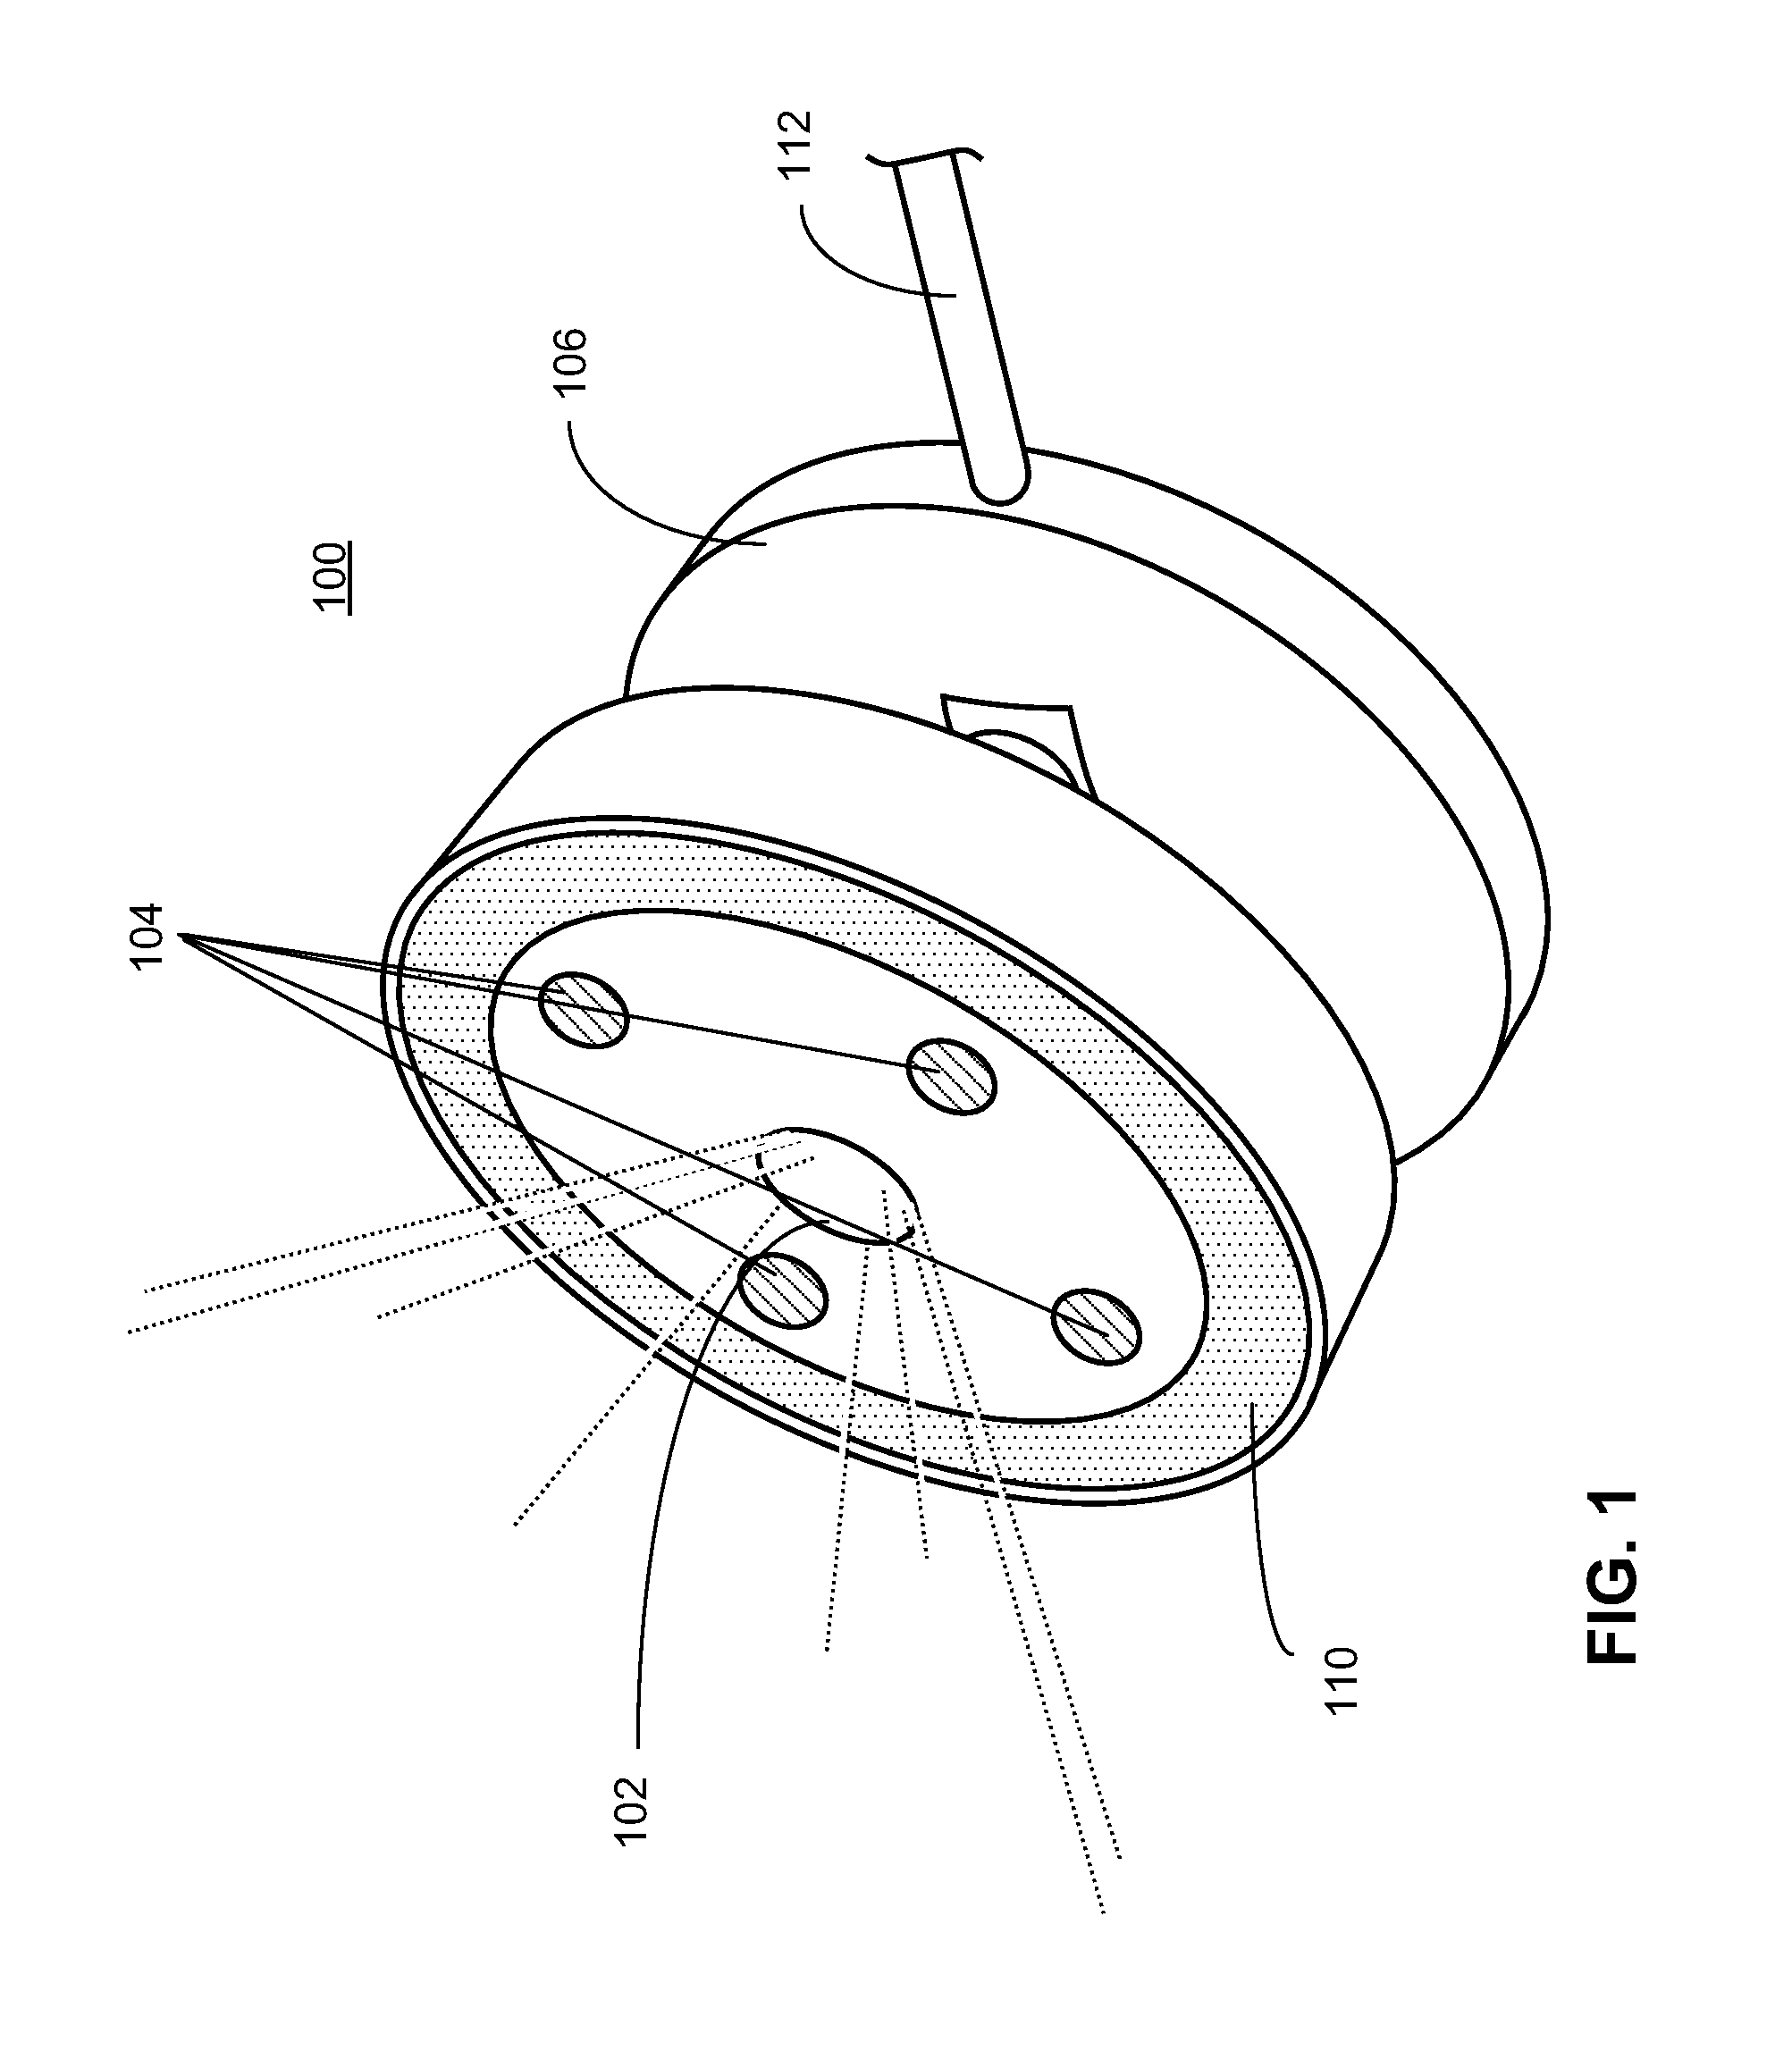 Device for adaptive projection